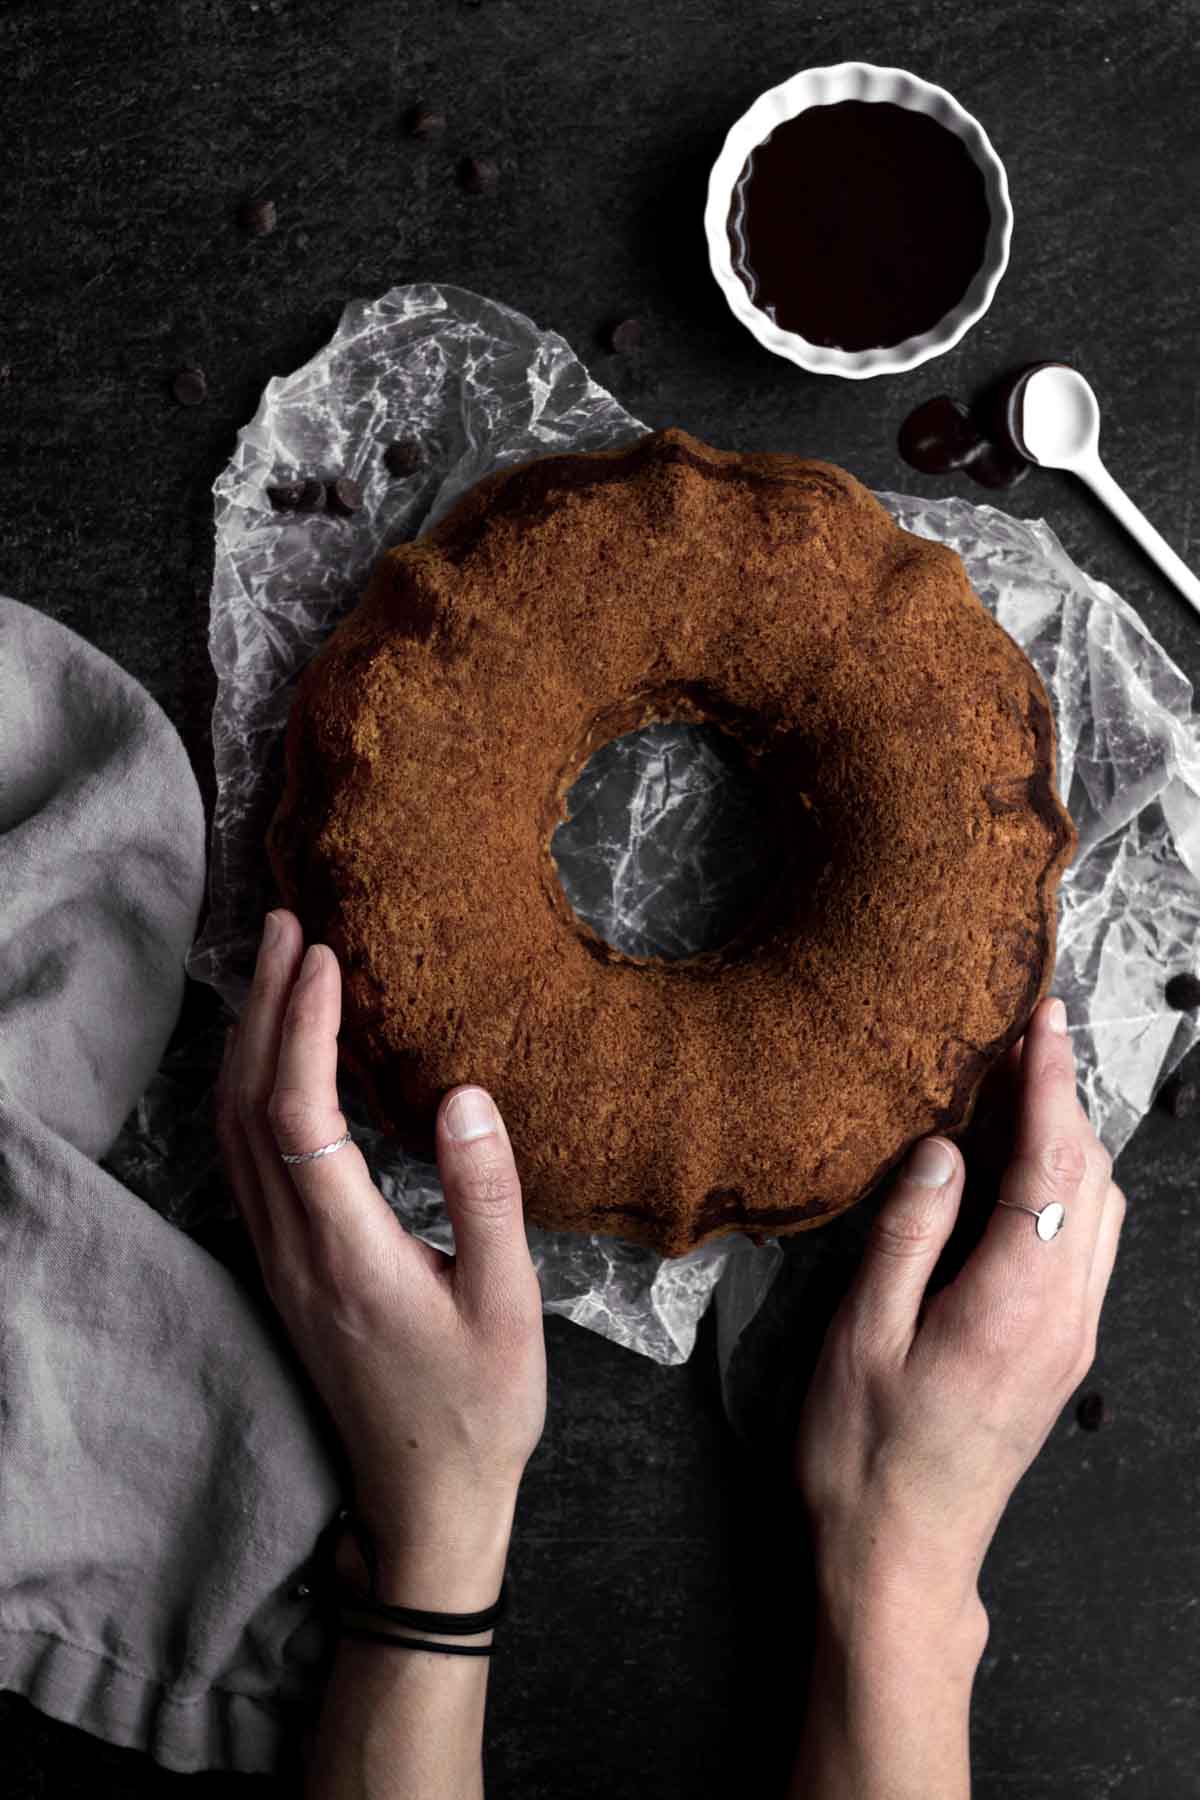 Round brown bundt cake fresh out of the oven.